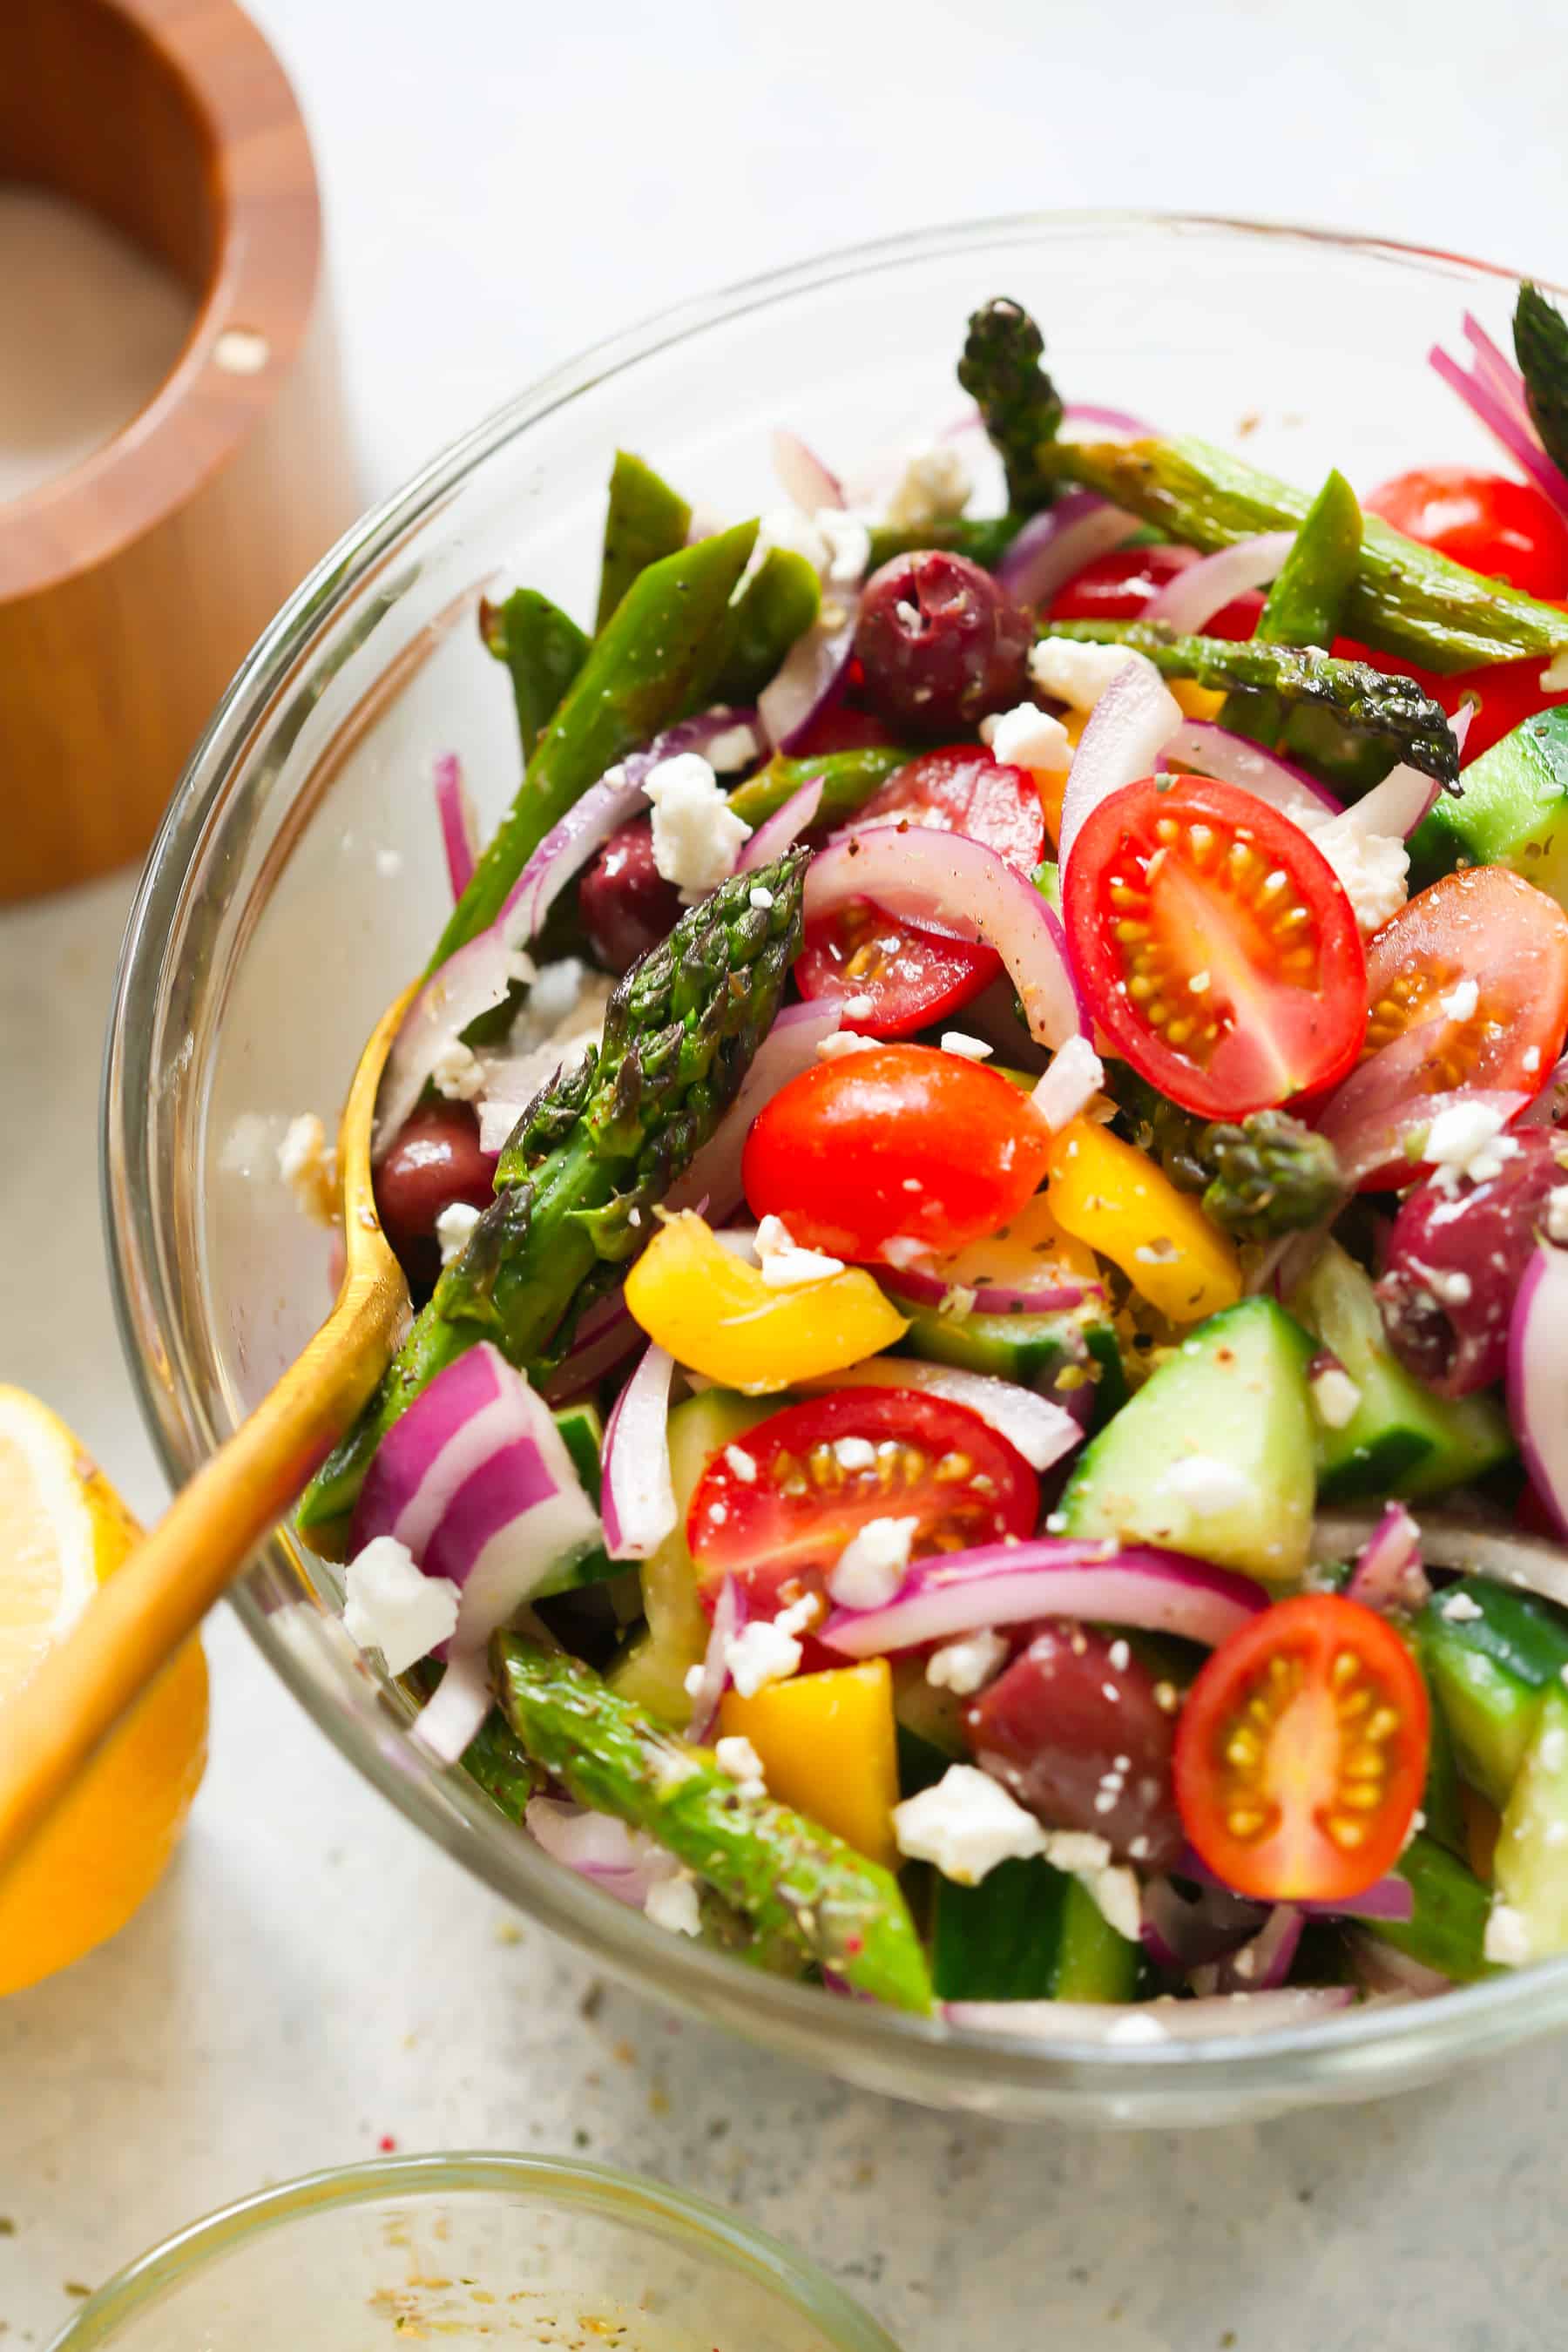 Asparagus Greek Chopped Salad - This Asparagus Greek Chopped Salad is made with roasted asparagus, cucumber, tomatoes, black olives, feta cheese and flavored with an easy lemon dressing.